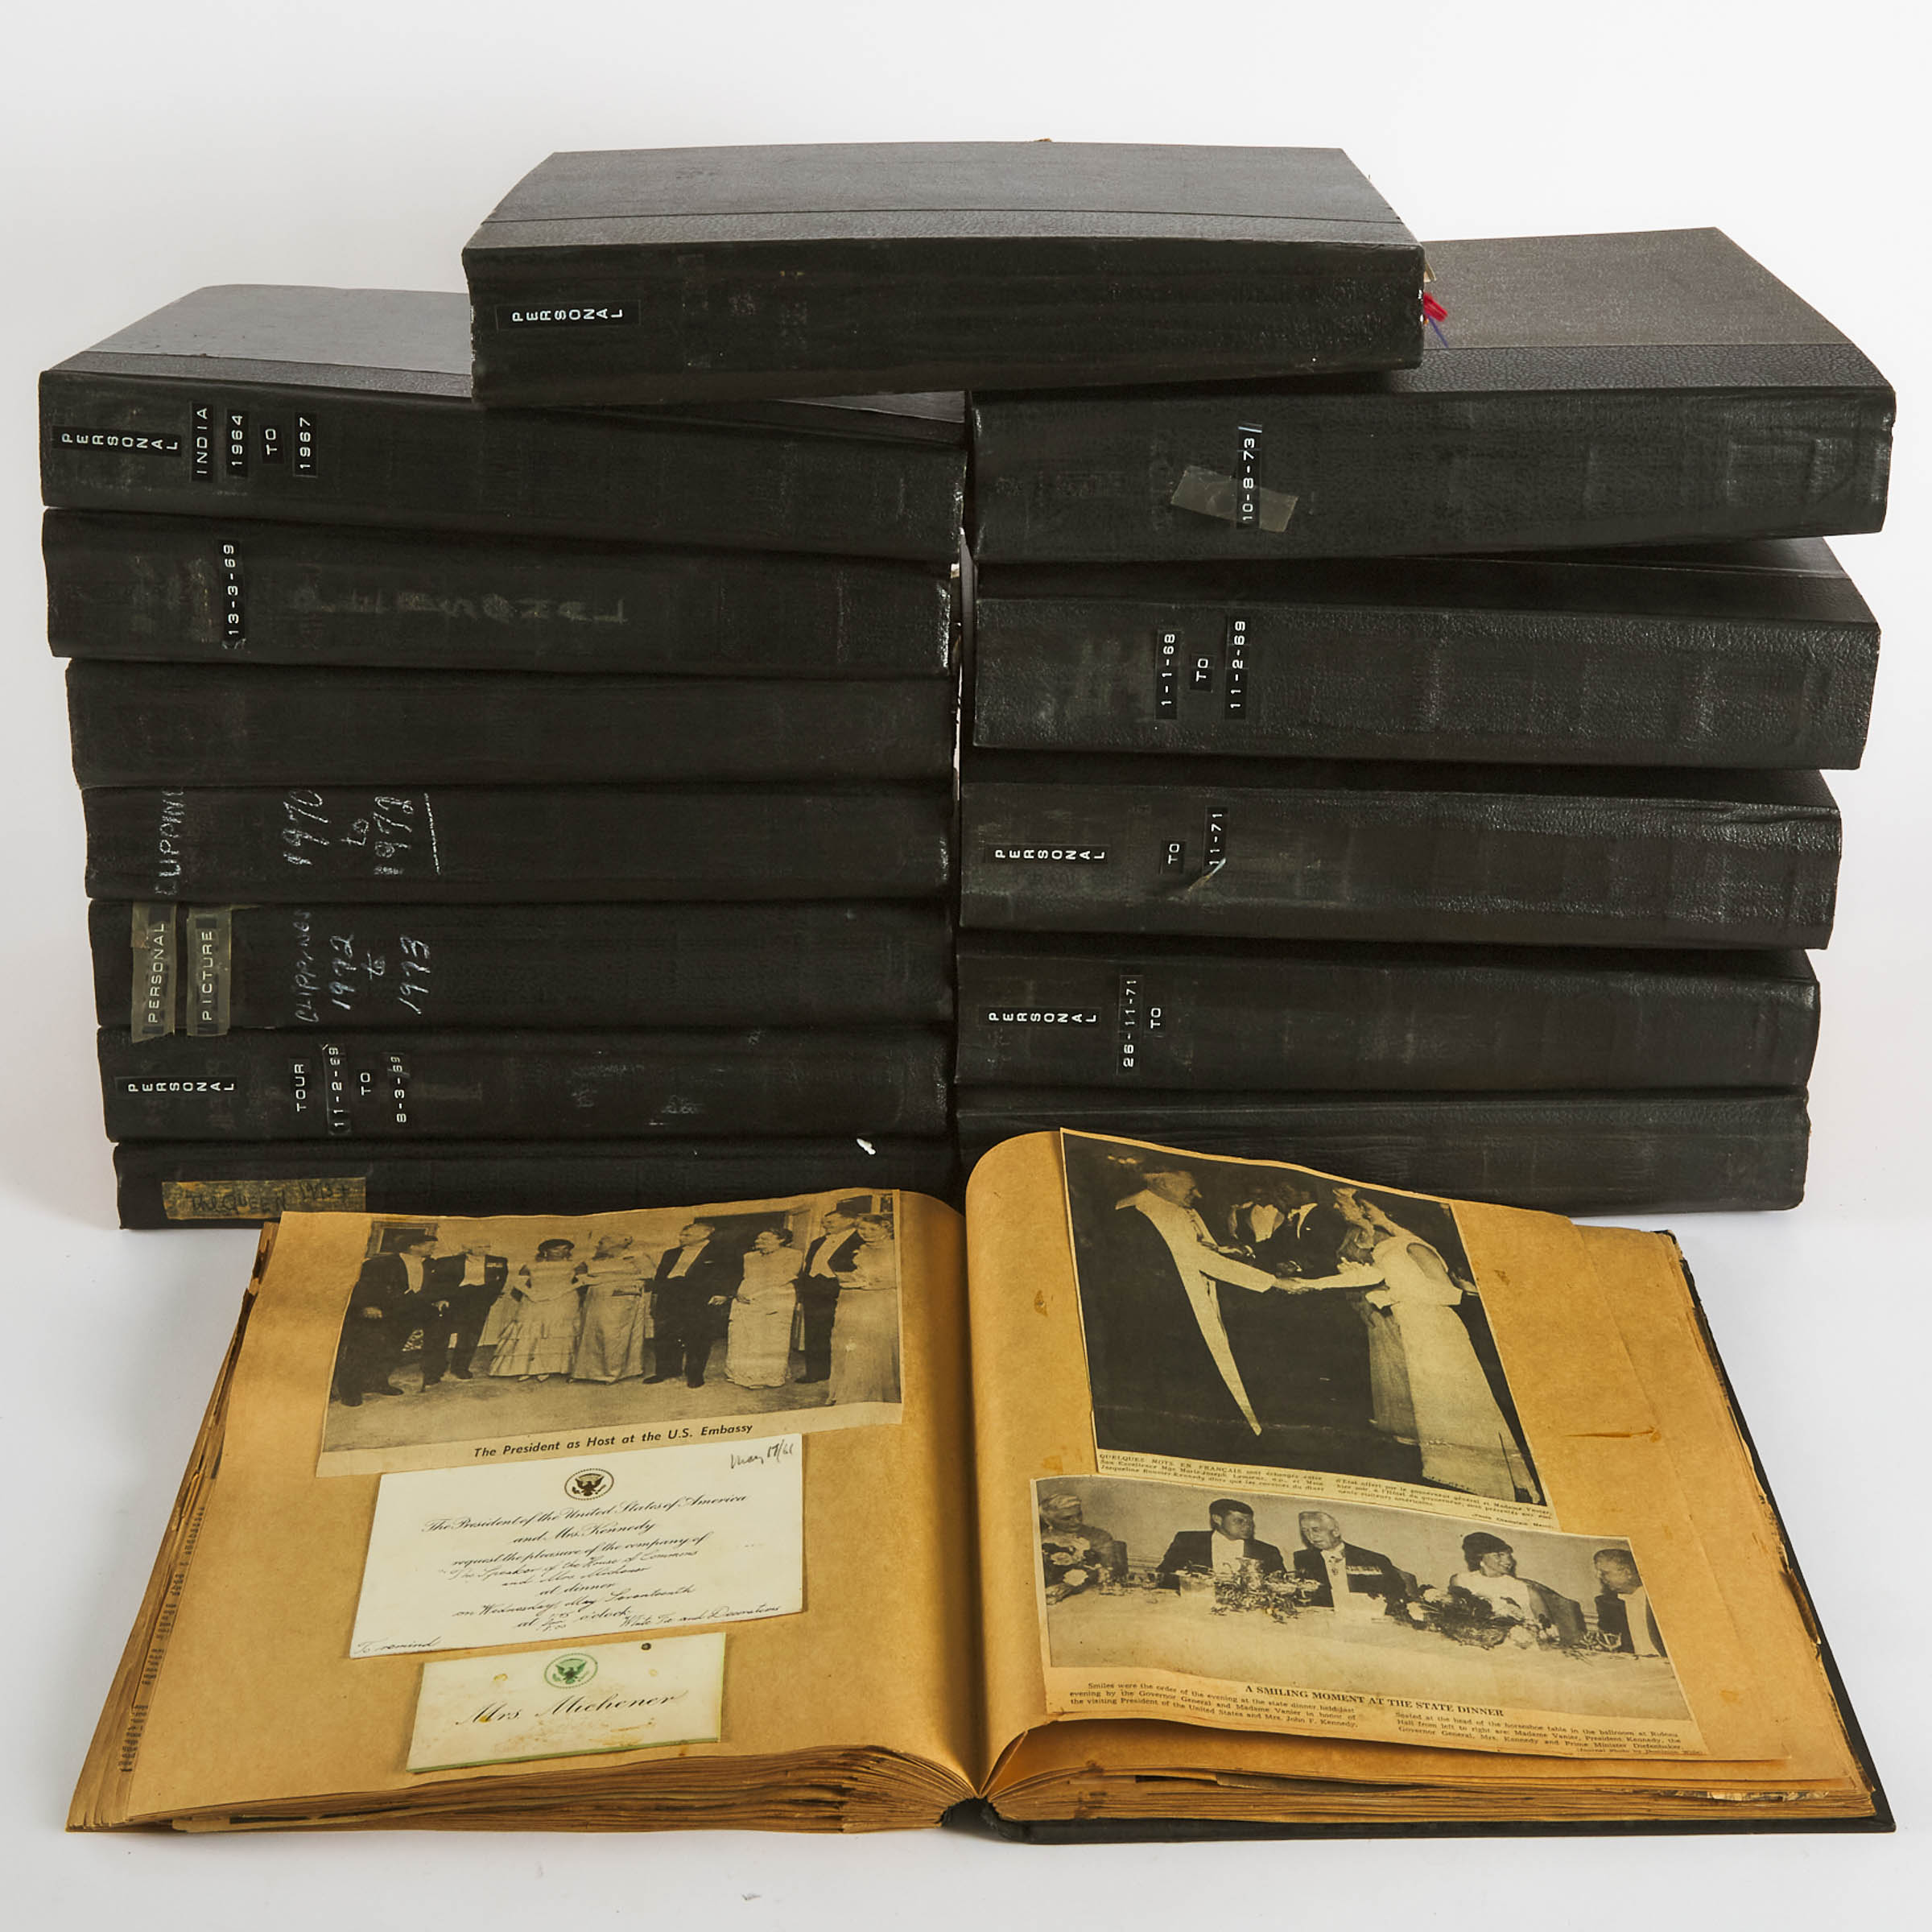 Archive of 14 Large Scrapbooks, 1958-1973 